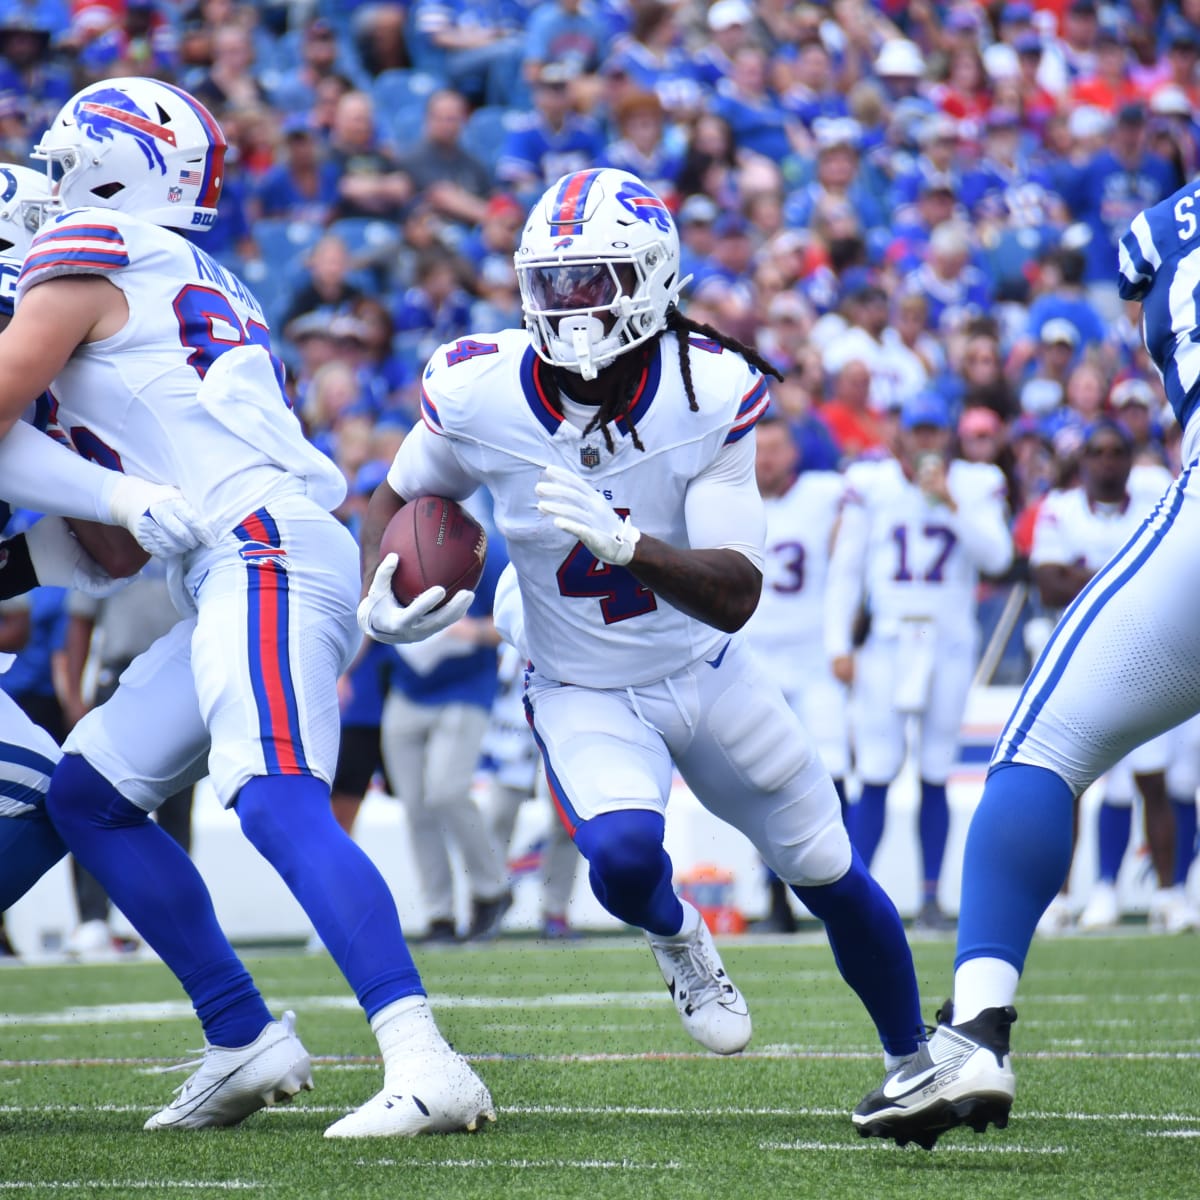 James Cook goes to the Bills; will play his brother Dalvin's